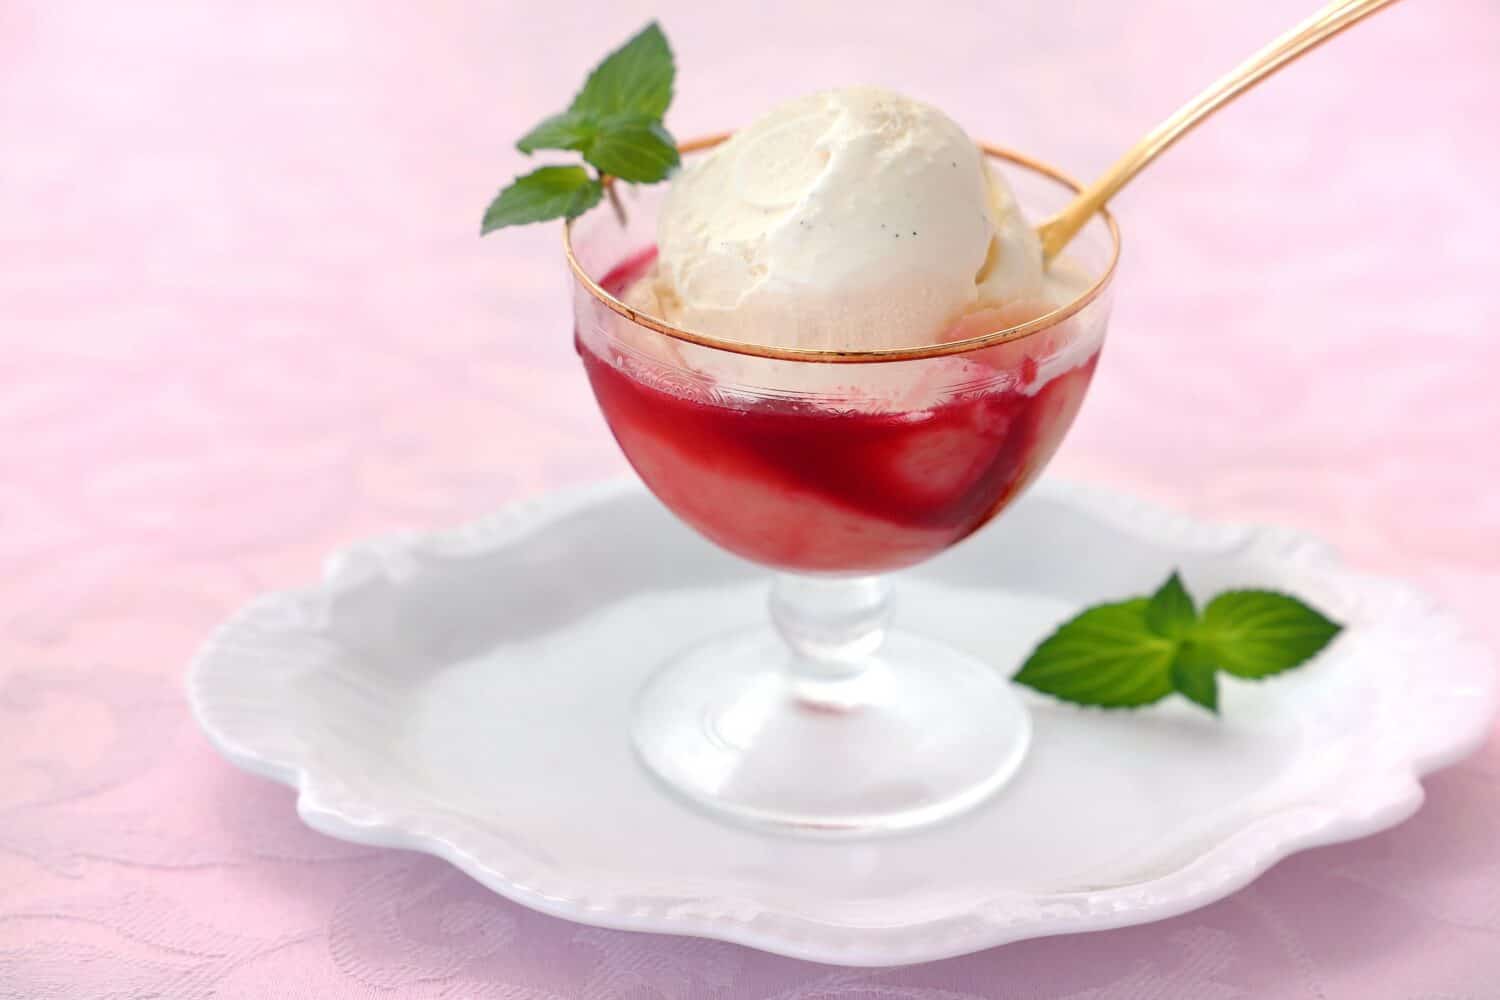 Summer dessert peach melba made with homemade peach compote and raspberry sauce